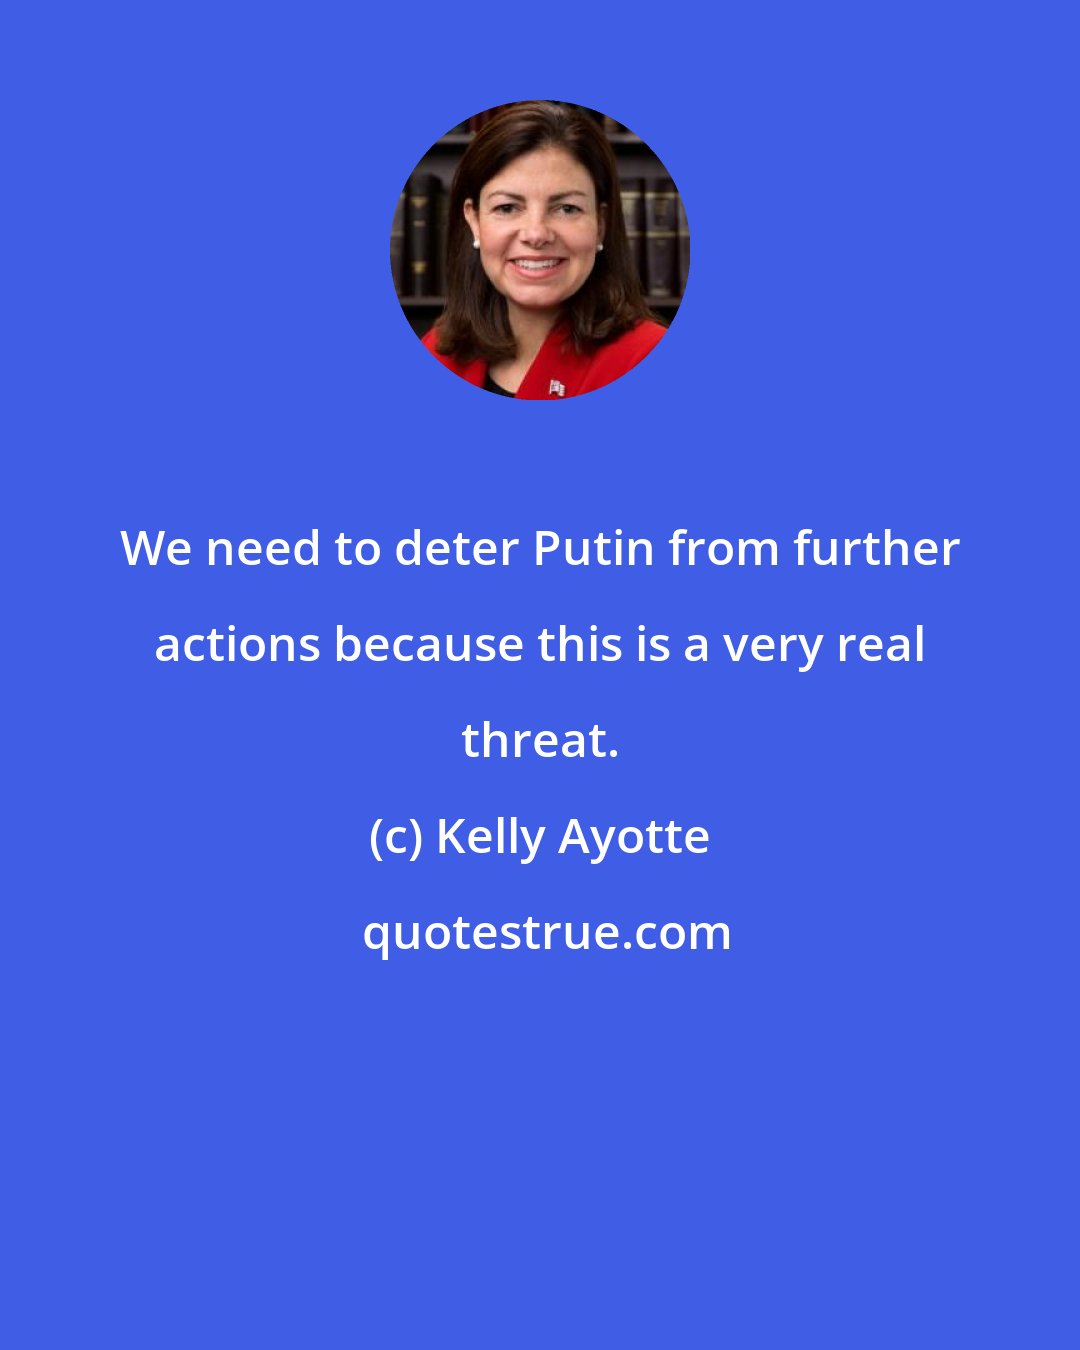 Kelly Ayotte: We need to deter Putin from further actions because this is a very real threat.